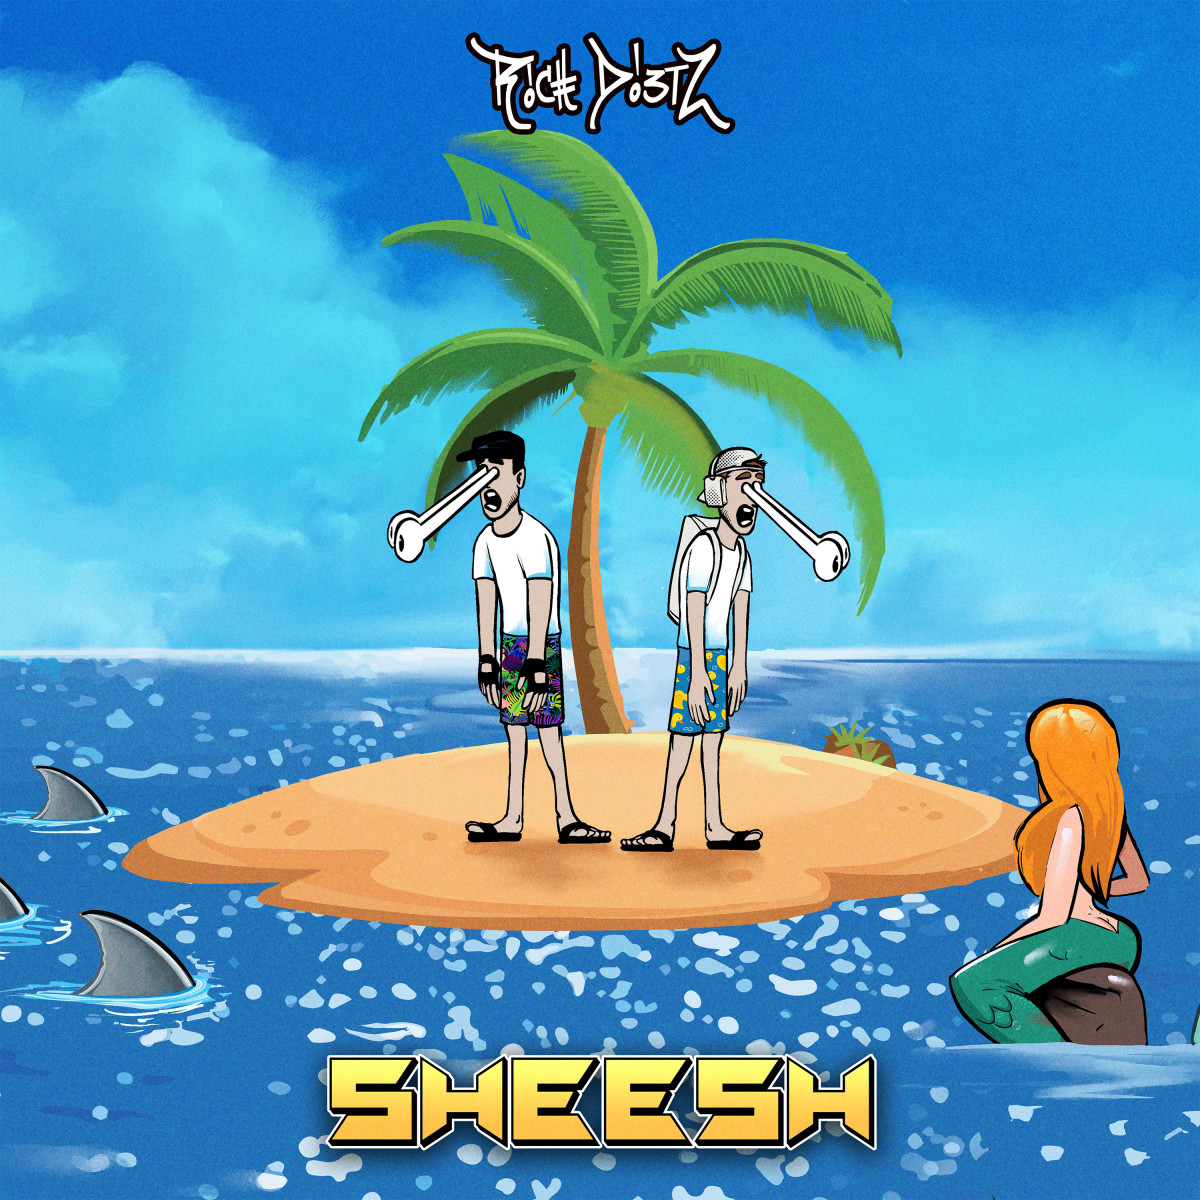 Cover art for Rich DietZ's song "Sheesh."